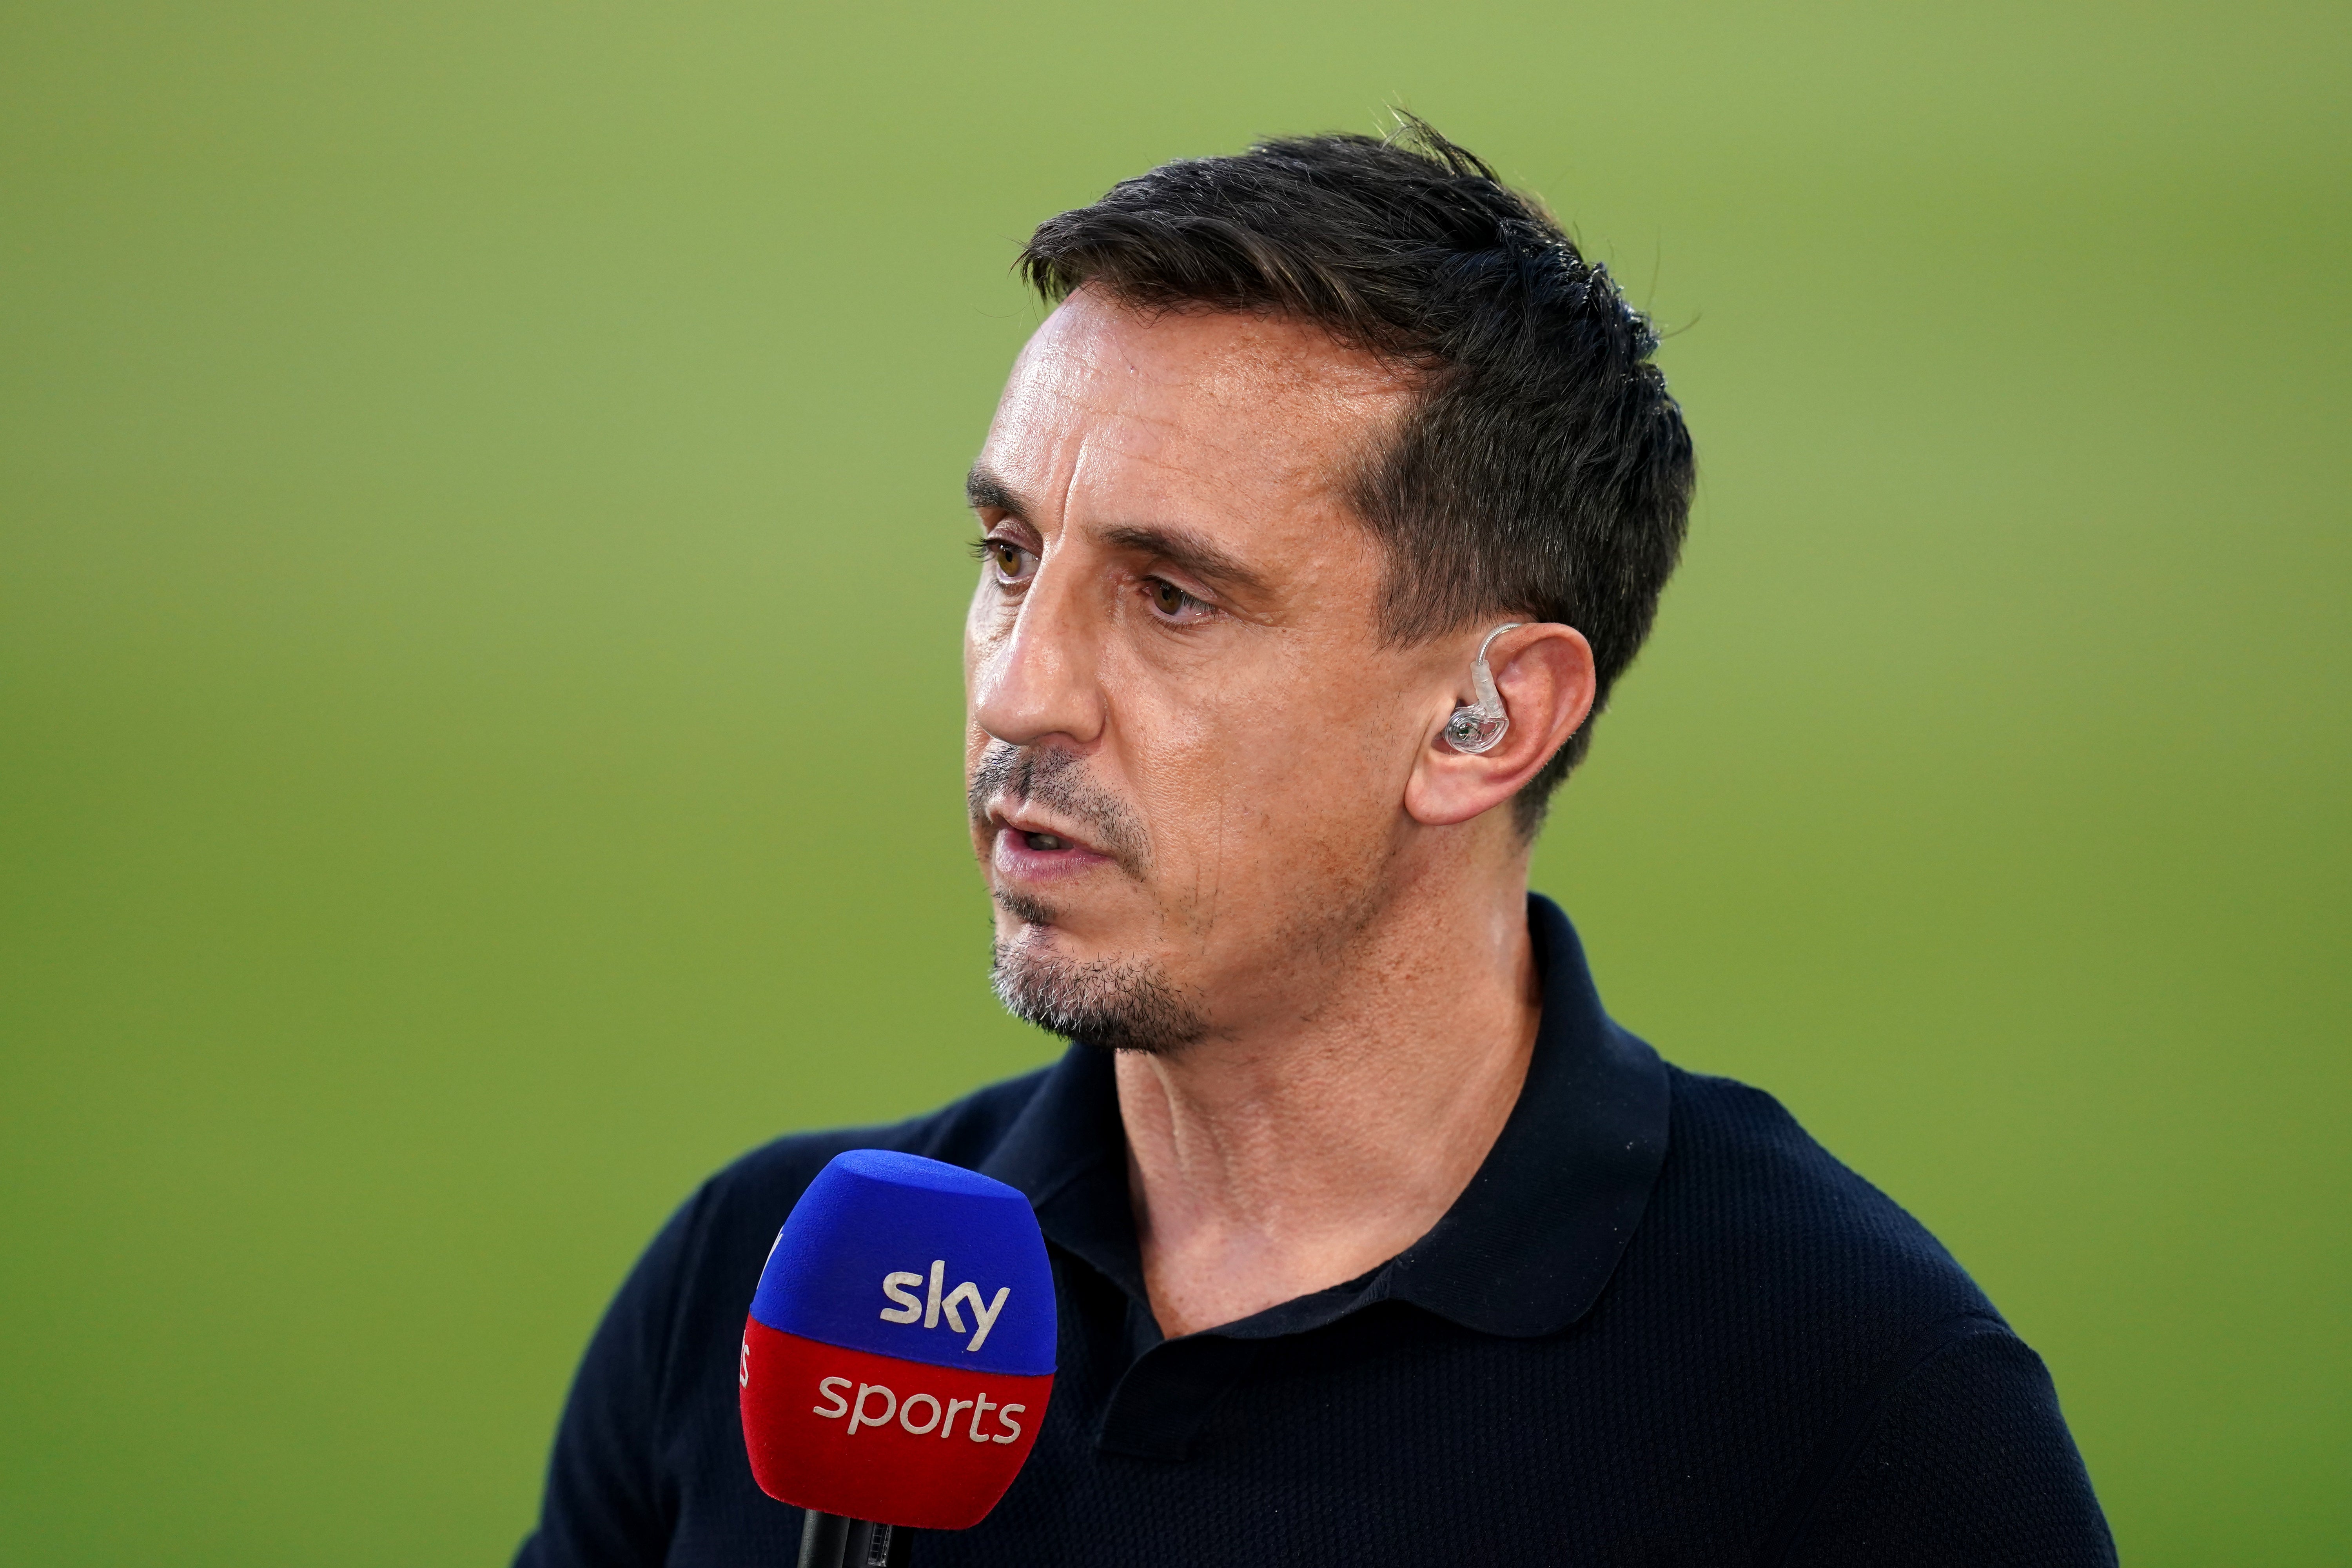 Gary Neville believes the government are cruel for giving the rich more money while the poorest struggle